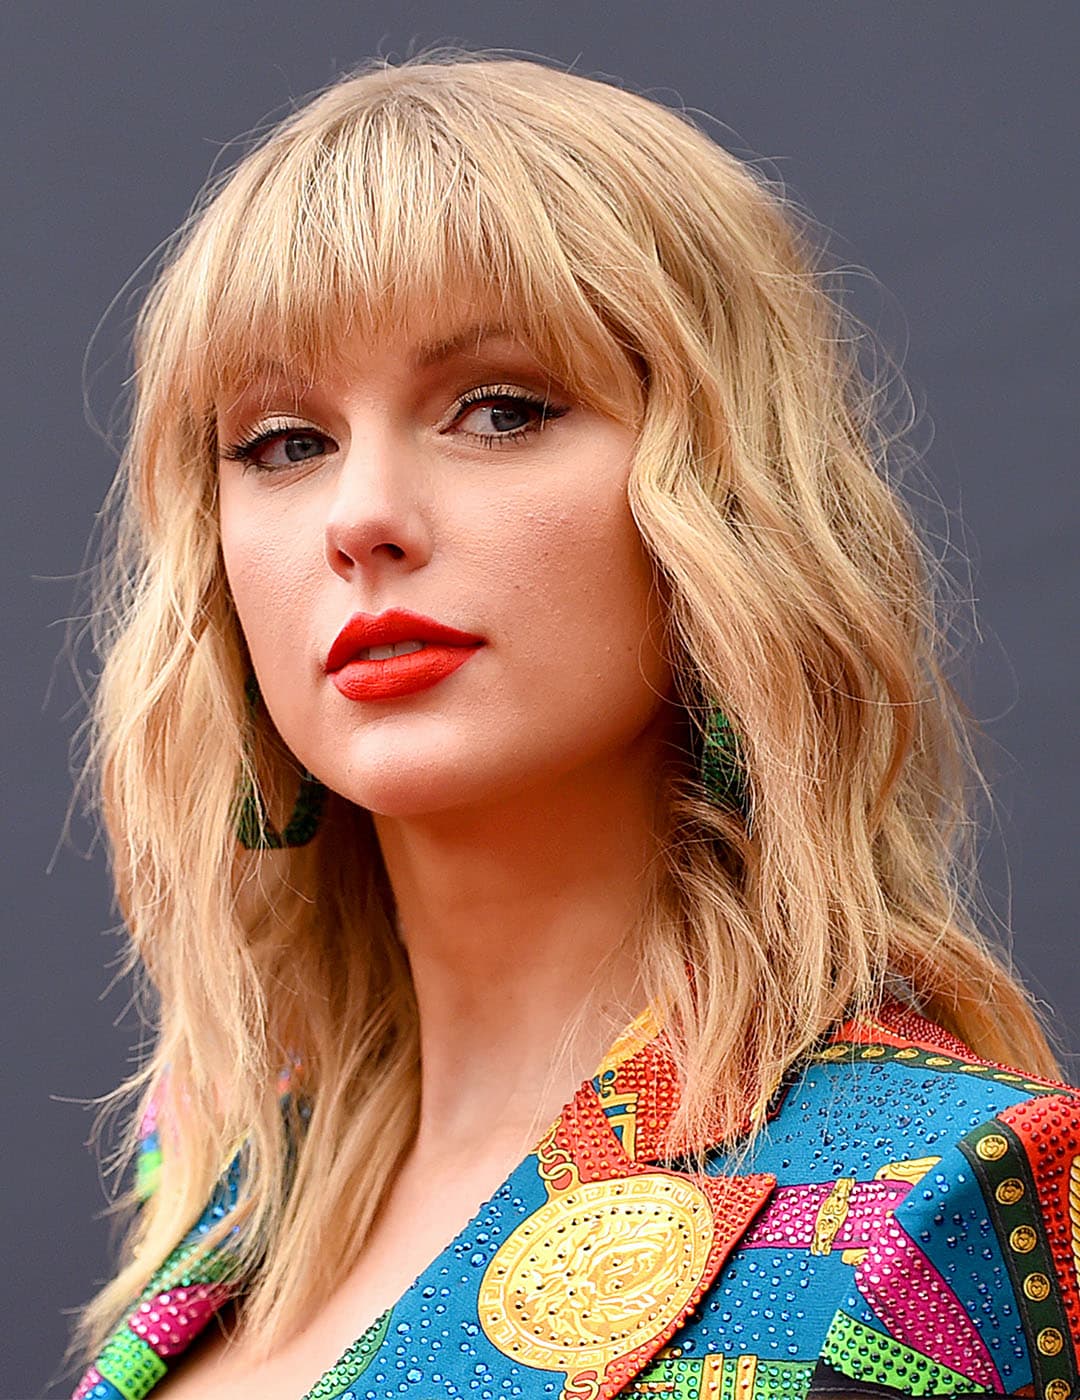 A photo of Taylor Swift flaunting her blonde shaggy hair paired with green hoop earrings and colorful top on a dark gray background